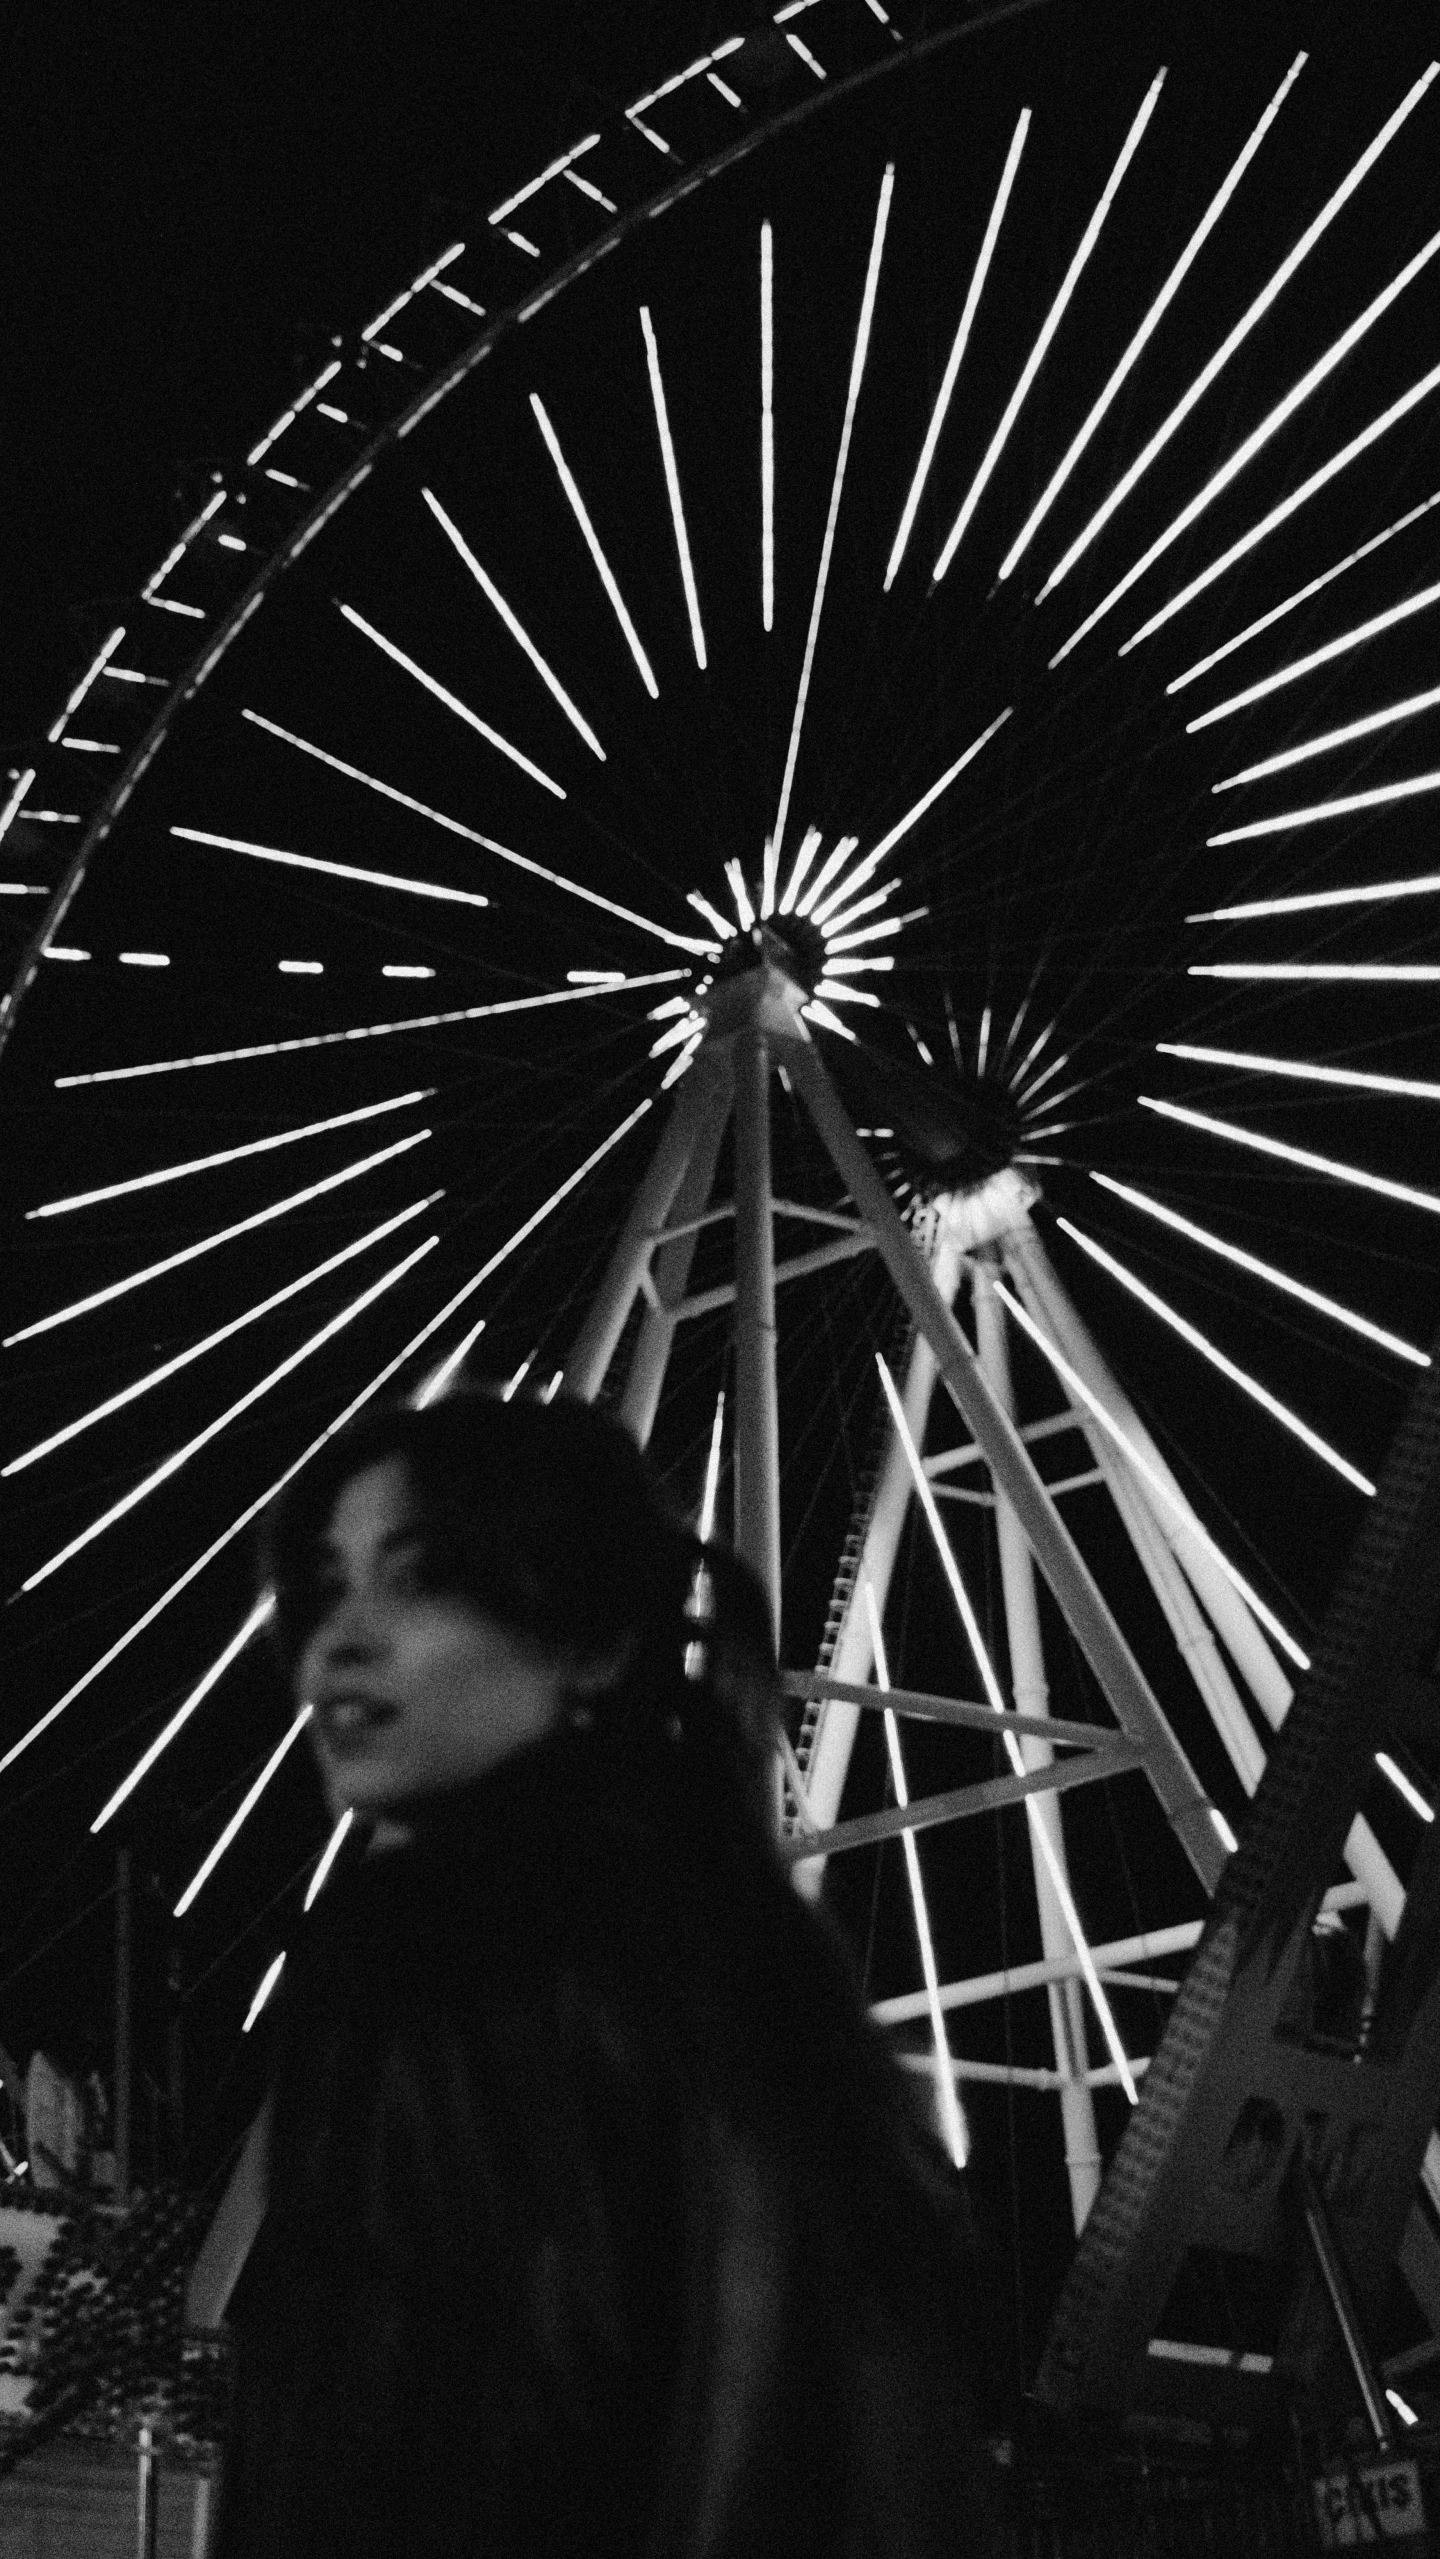 a wheel of a ferris wheel in black and white